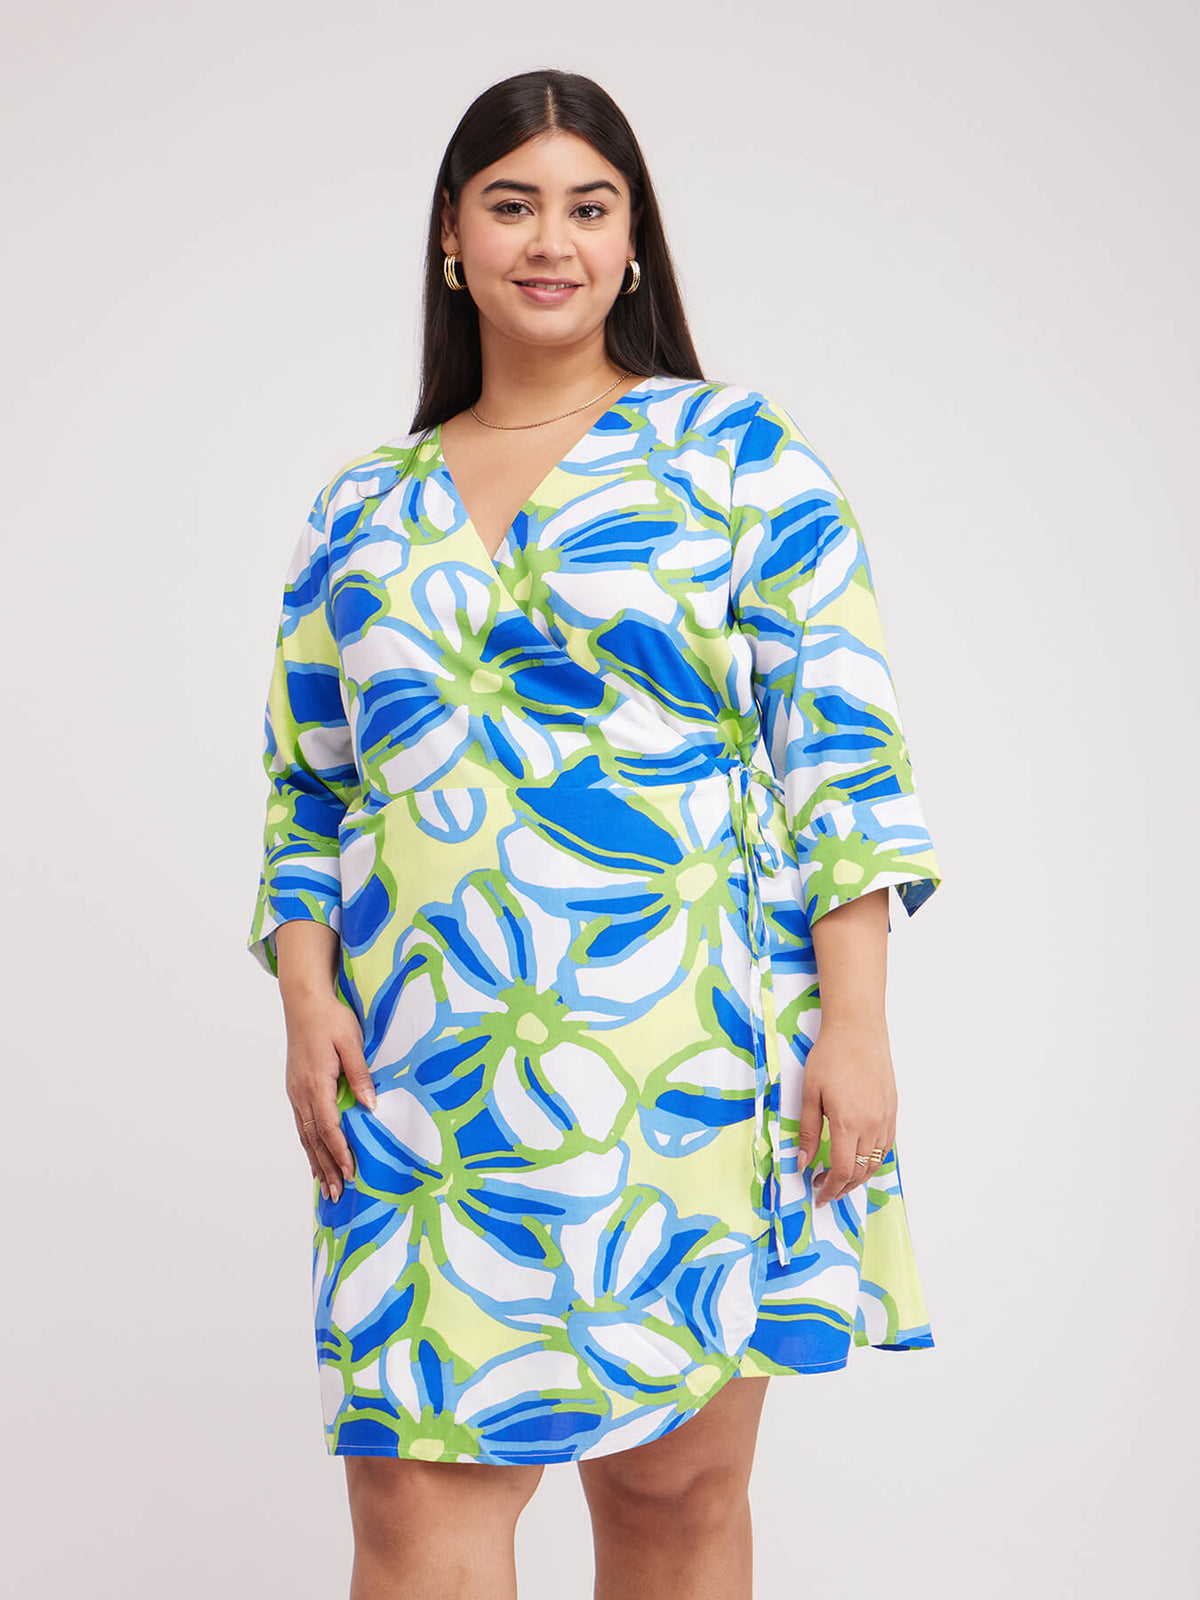 Floral Print Wrap Dress - Green And White